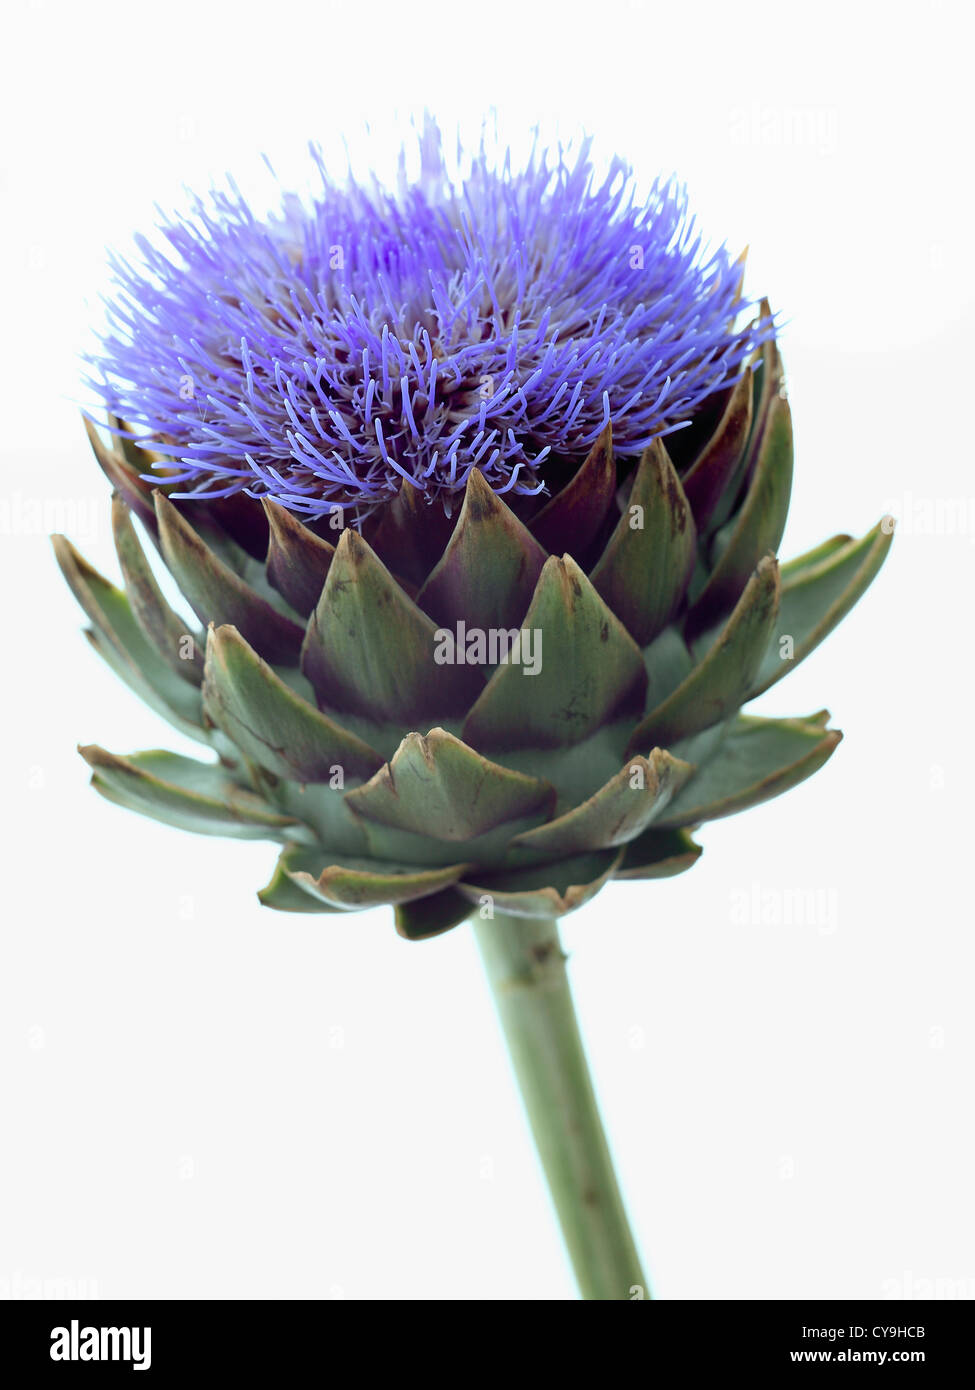 Cynara scolymus, Globe artichoke. Blue flower above the lobed green leaves of this perennial edible thistle. Stock Photo